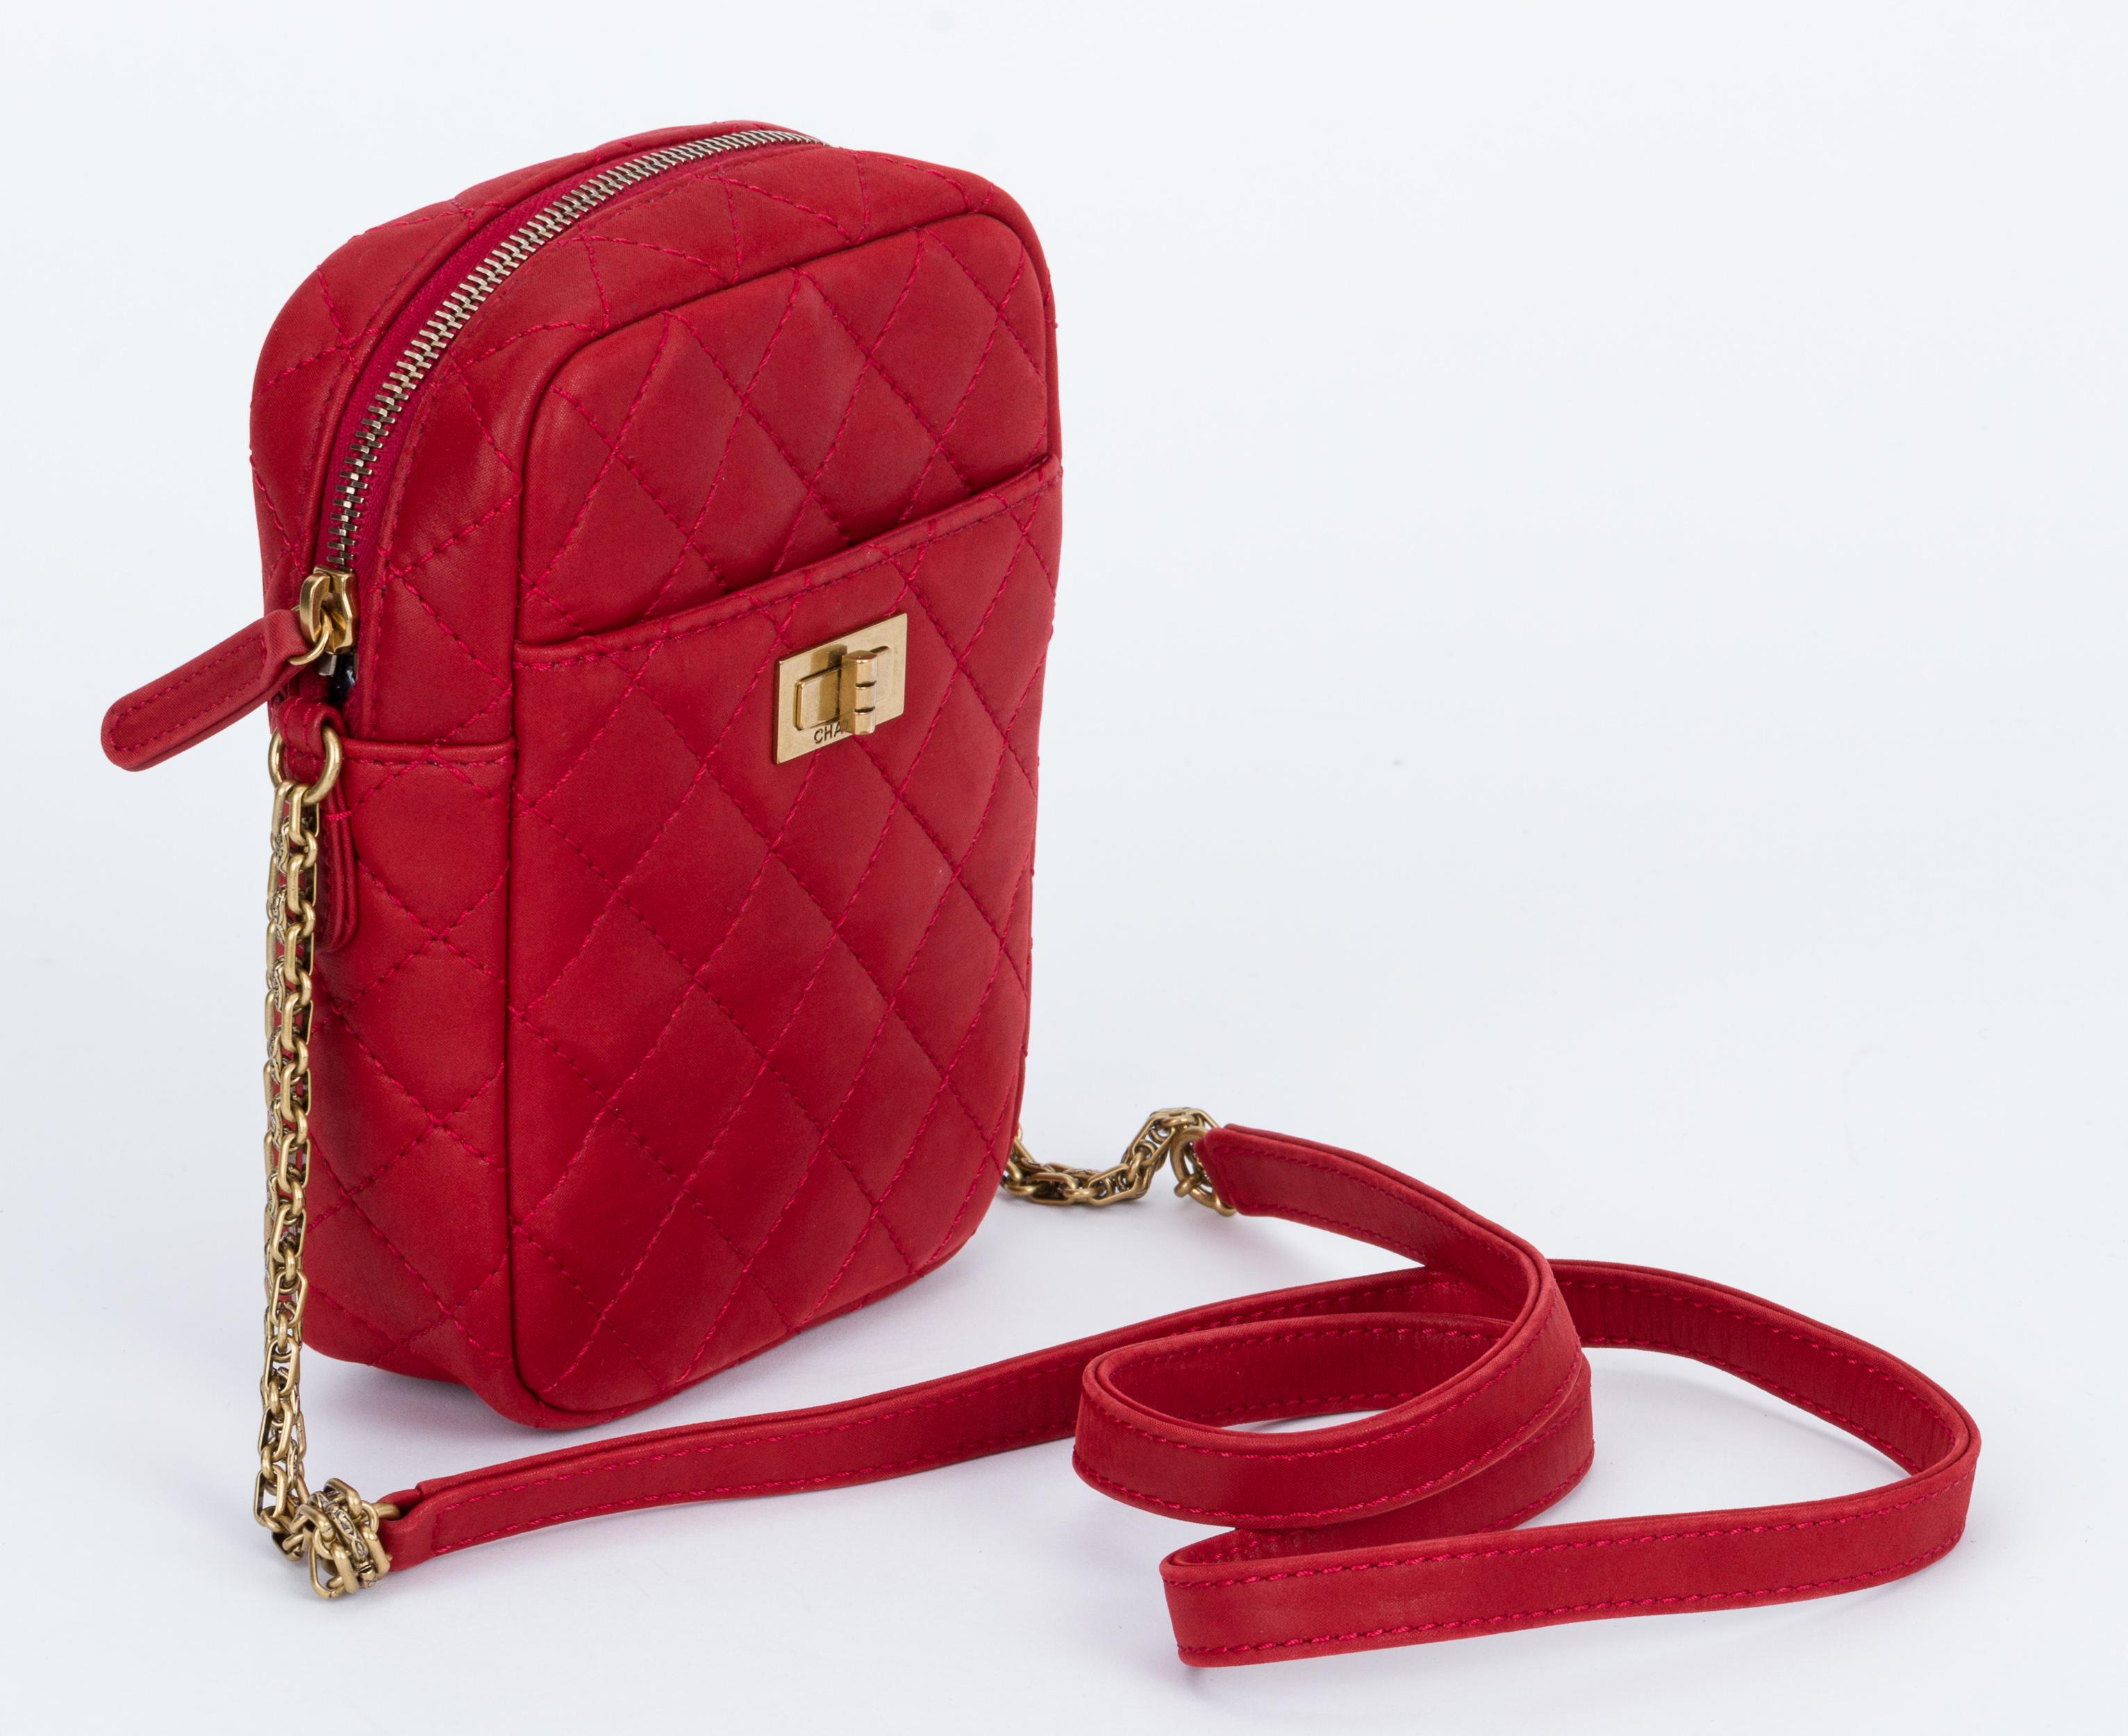 Chanel red leather reissue cross body bag with gold tone hardware. Brand new. Shoulder drop 23